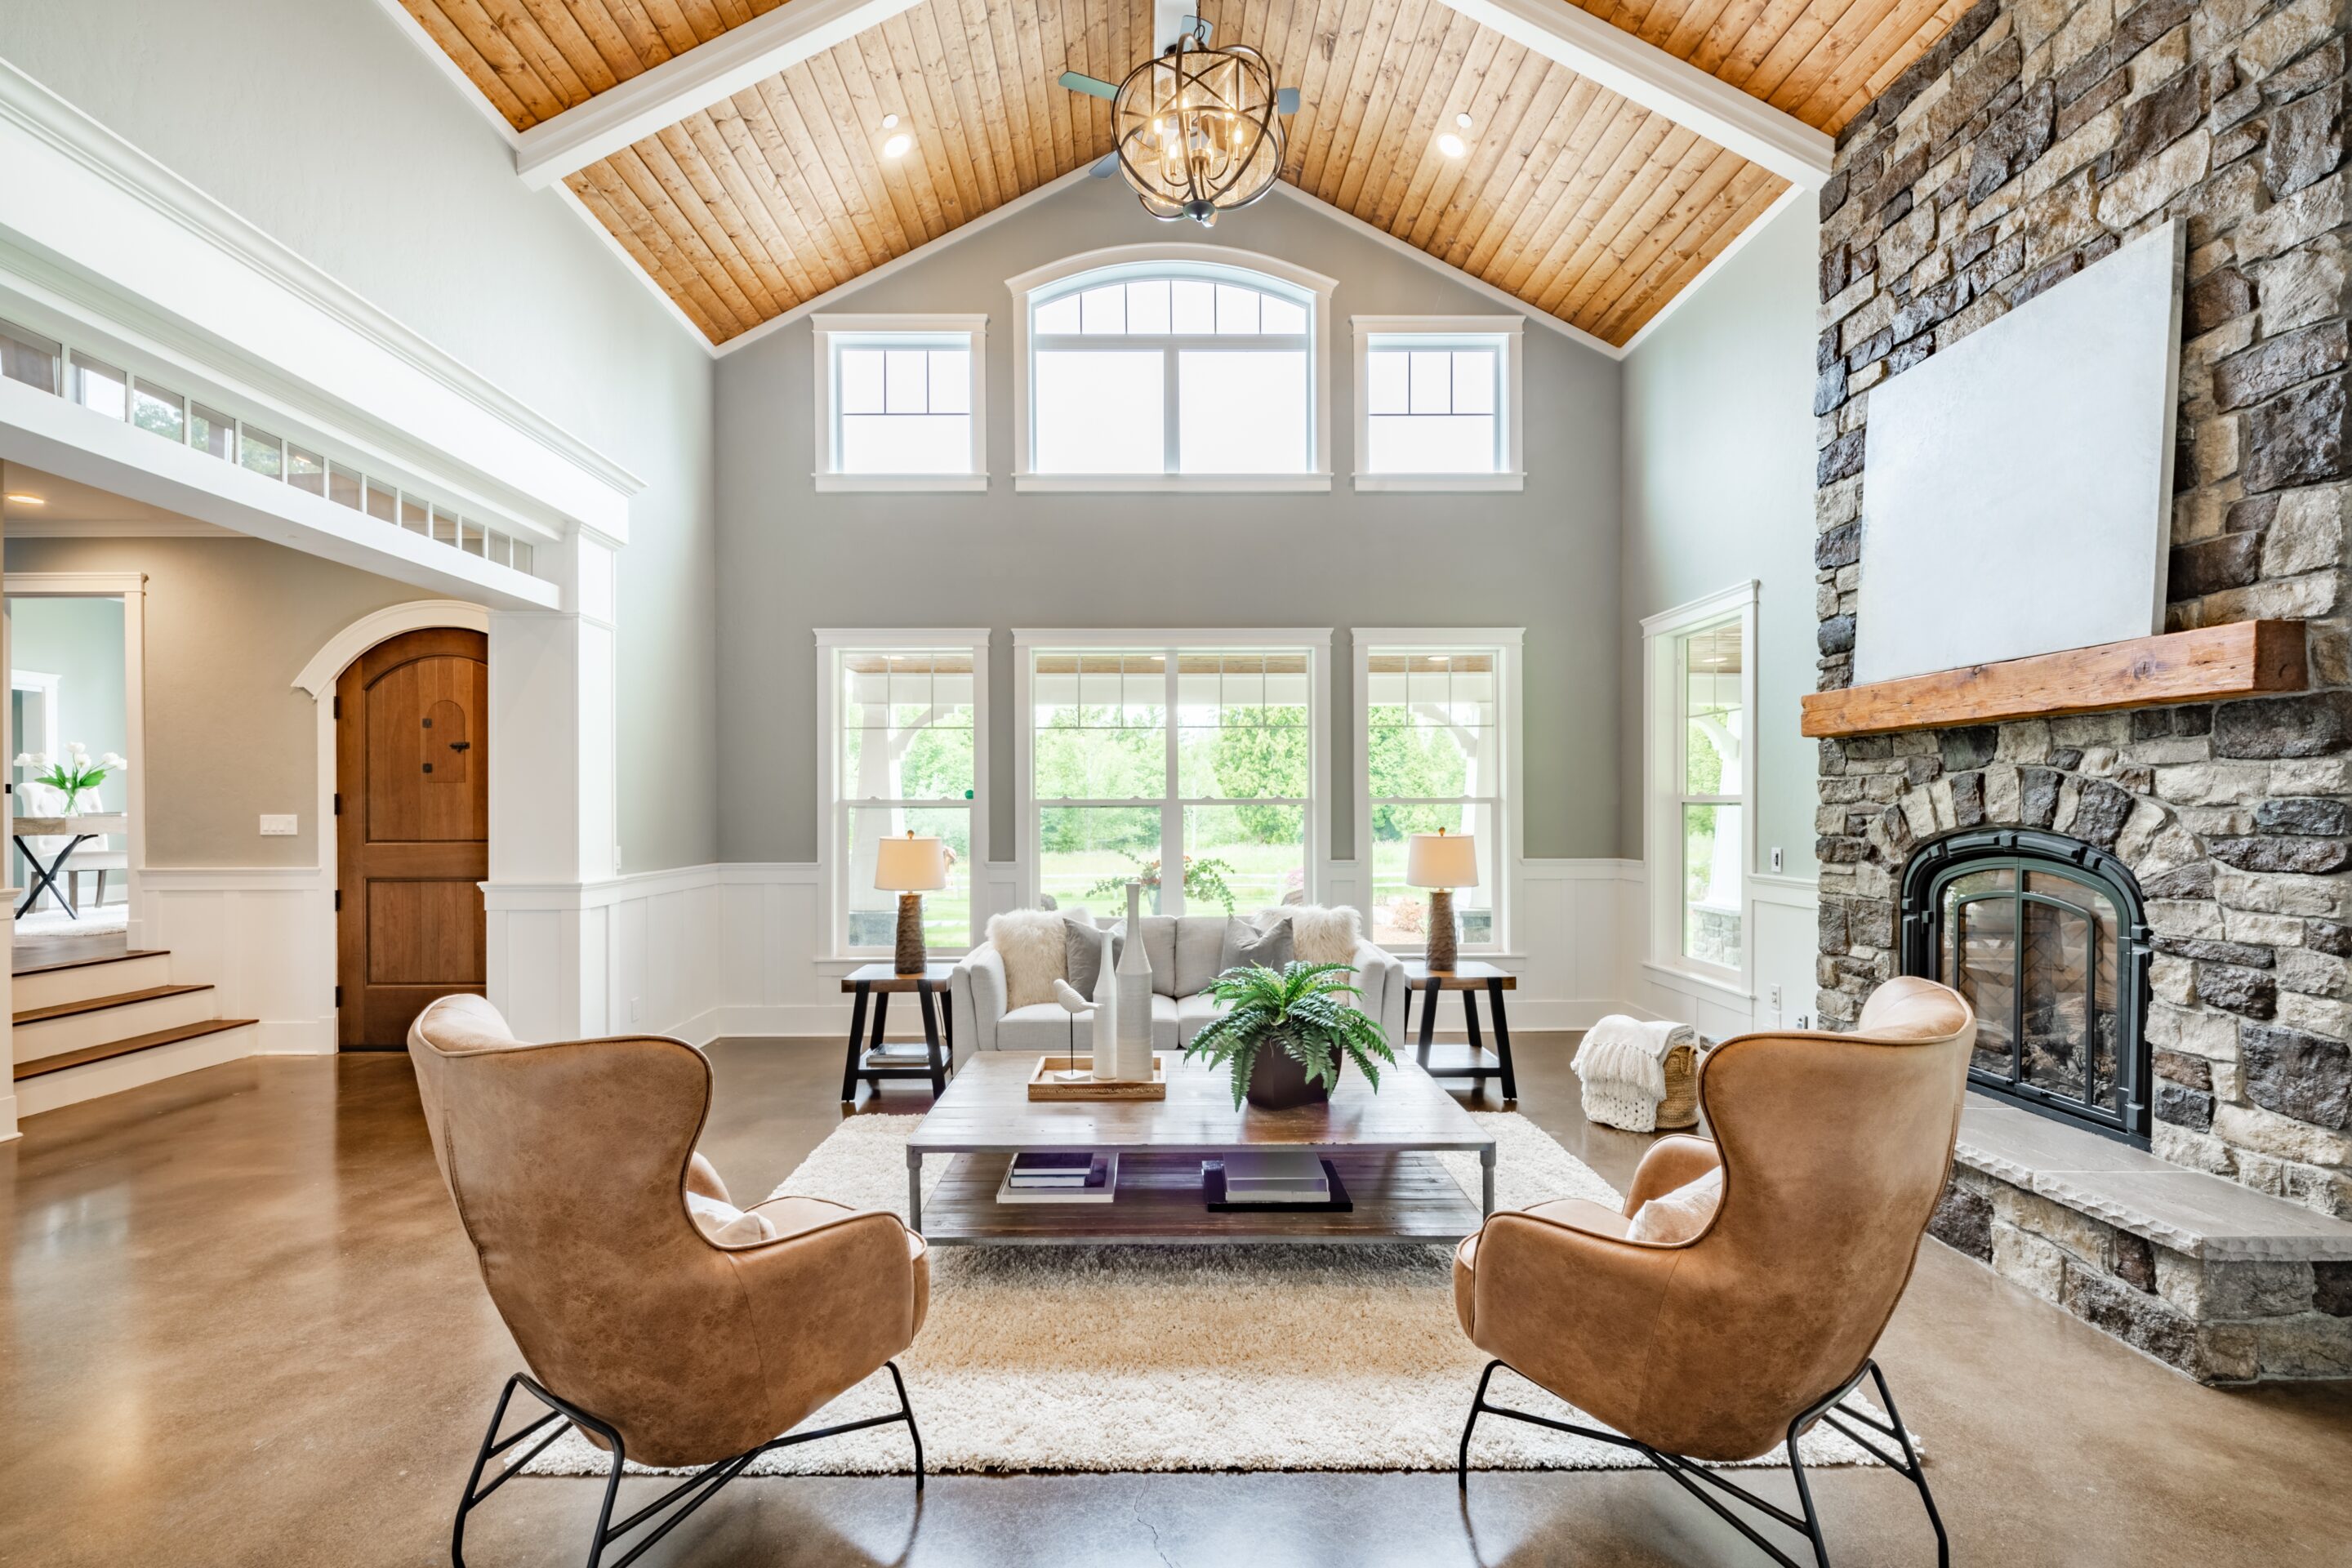 Luxurious living room in a high-end home, showcasing a modern design with a vaulted ceiling adorned with exposed wooden beams and a grand stone fireplace, embodying the sophistication and security covered by high end home insurance.